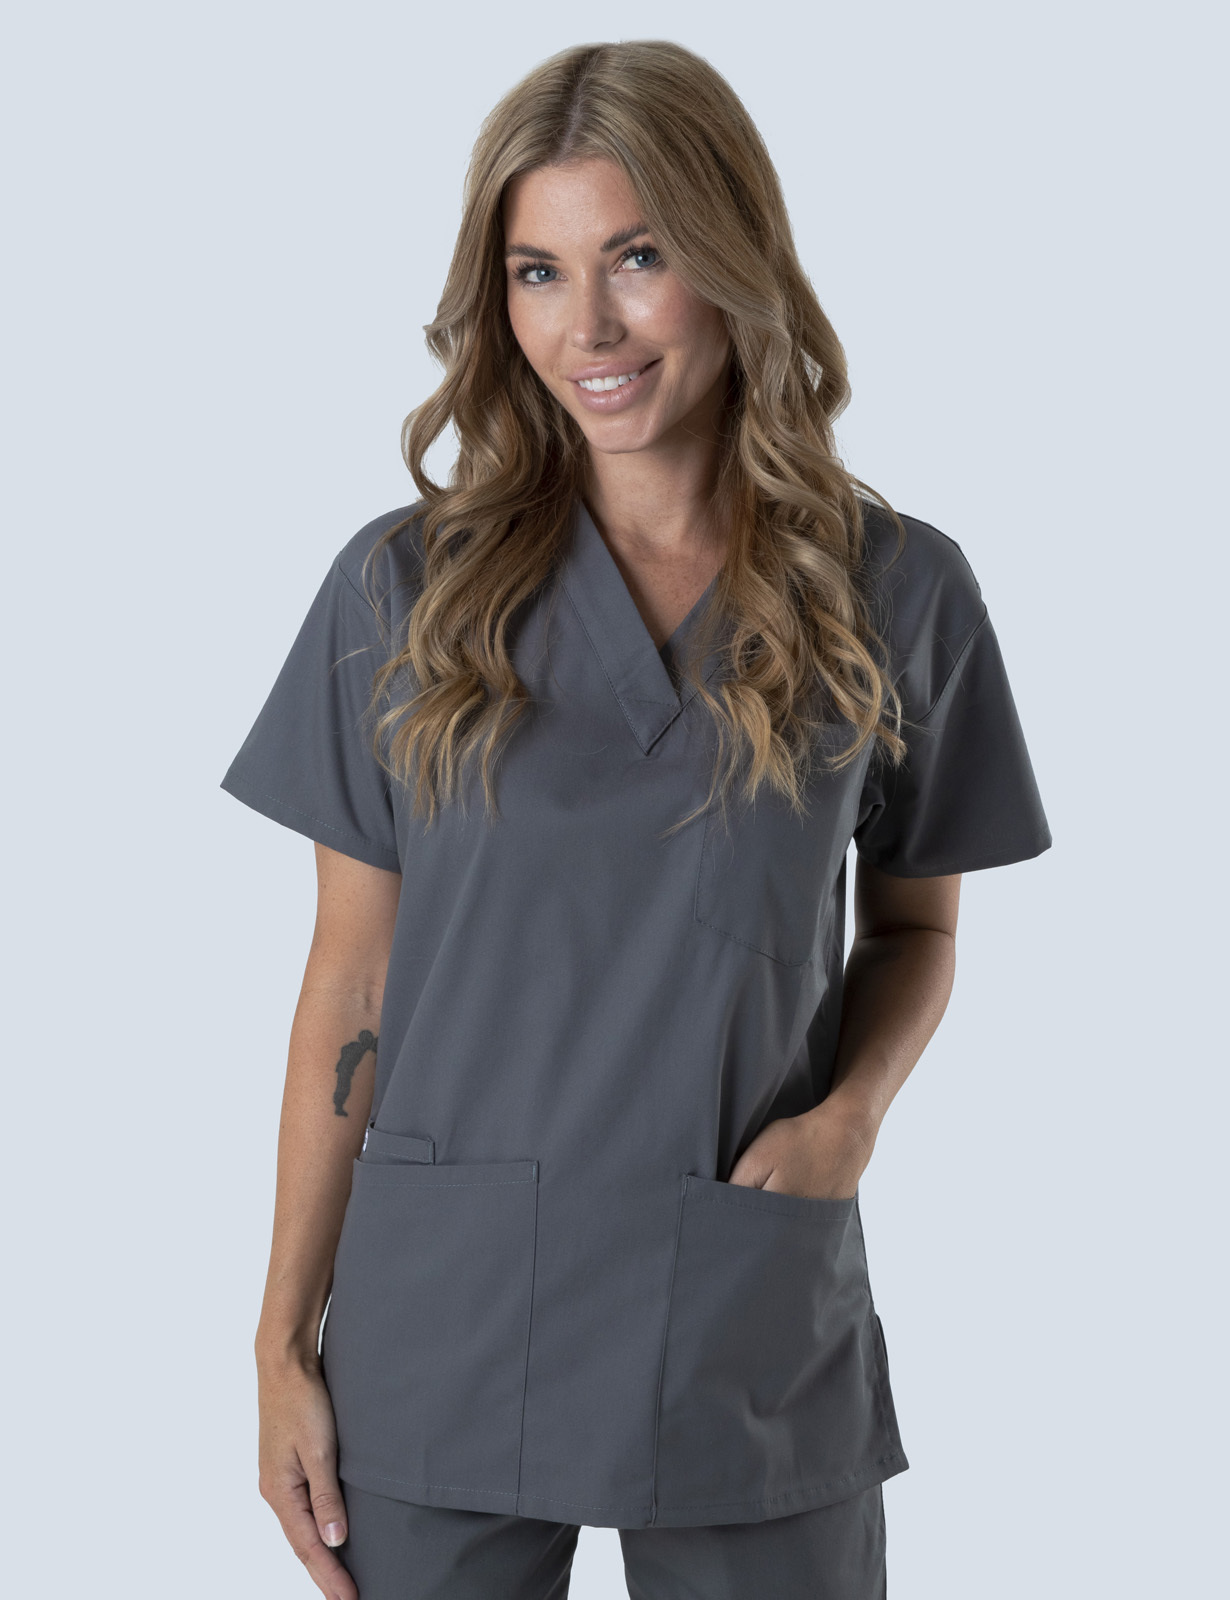 Toowoomba Hospital - Doctor (4 Pocket Scrub Top and Cargo Pants in Steel Grey incl Logos)